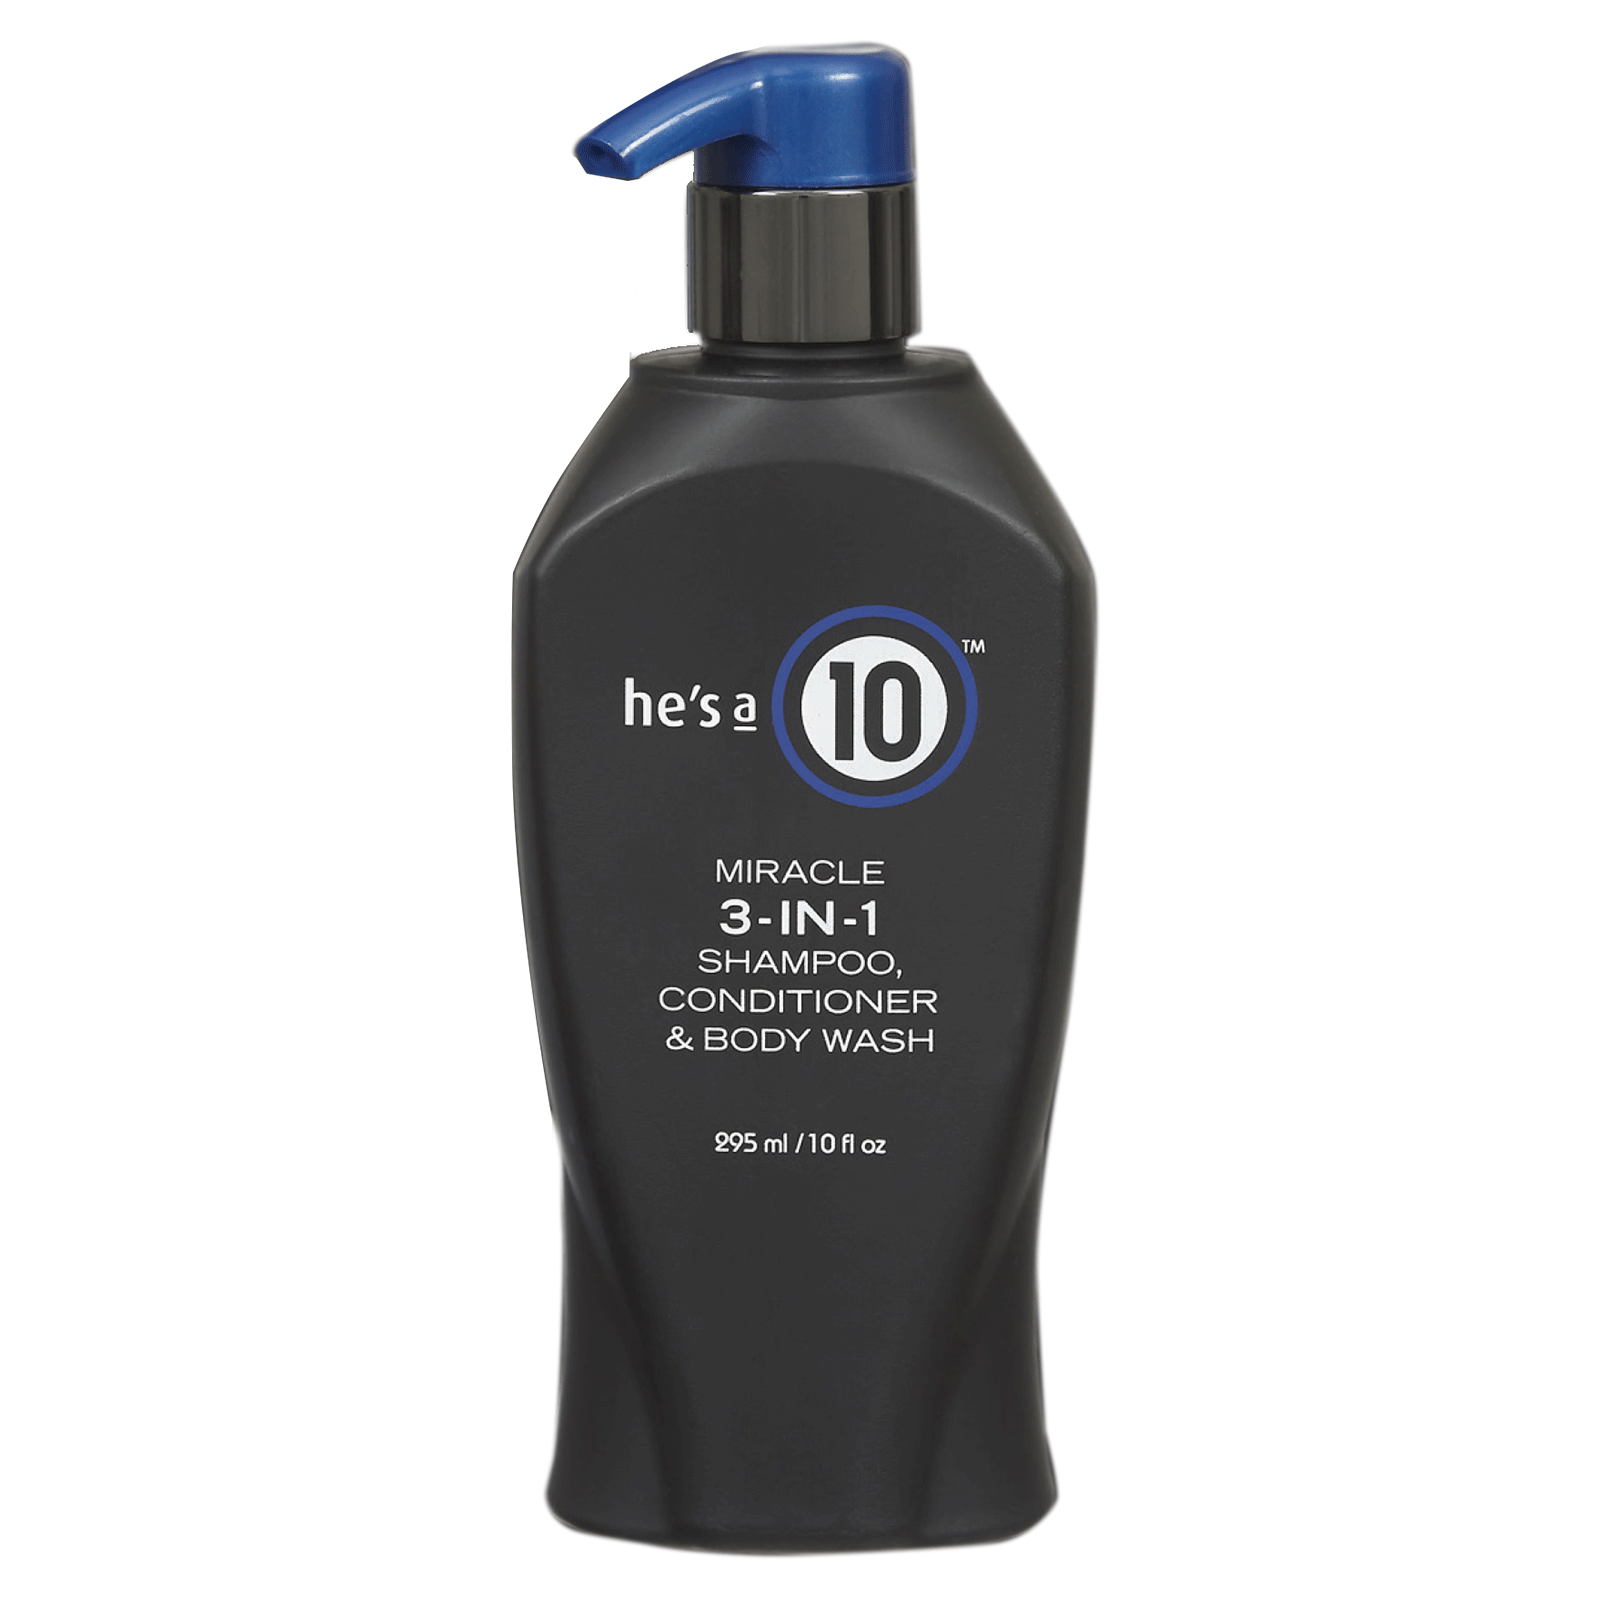 Primary image for It's A 10 He's A 10 Miracle 3-in-1 Shampoo, Conditioner and Body Wash 10oz 